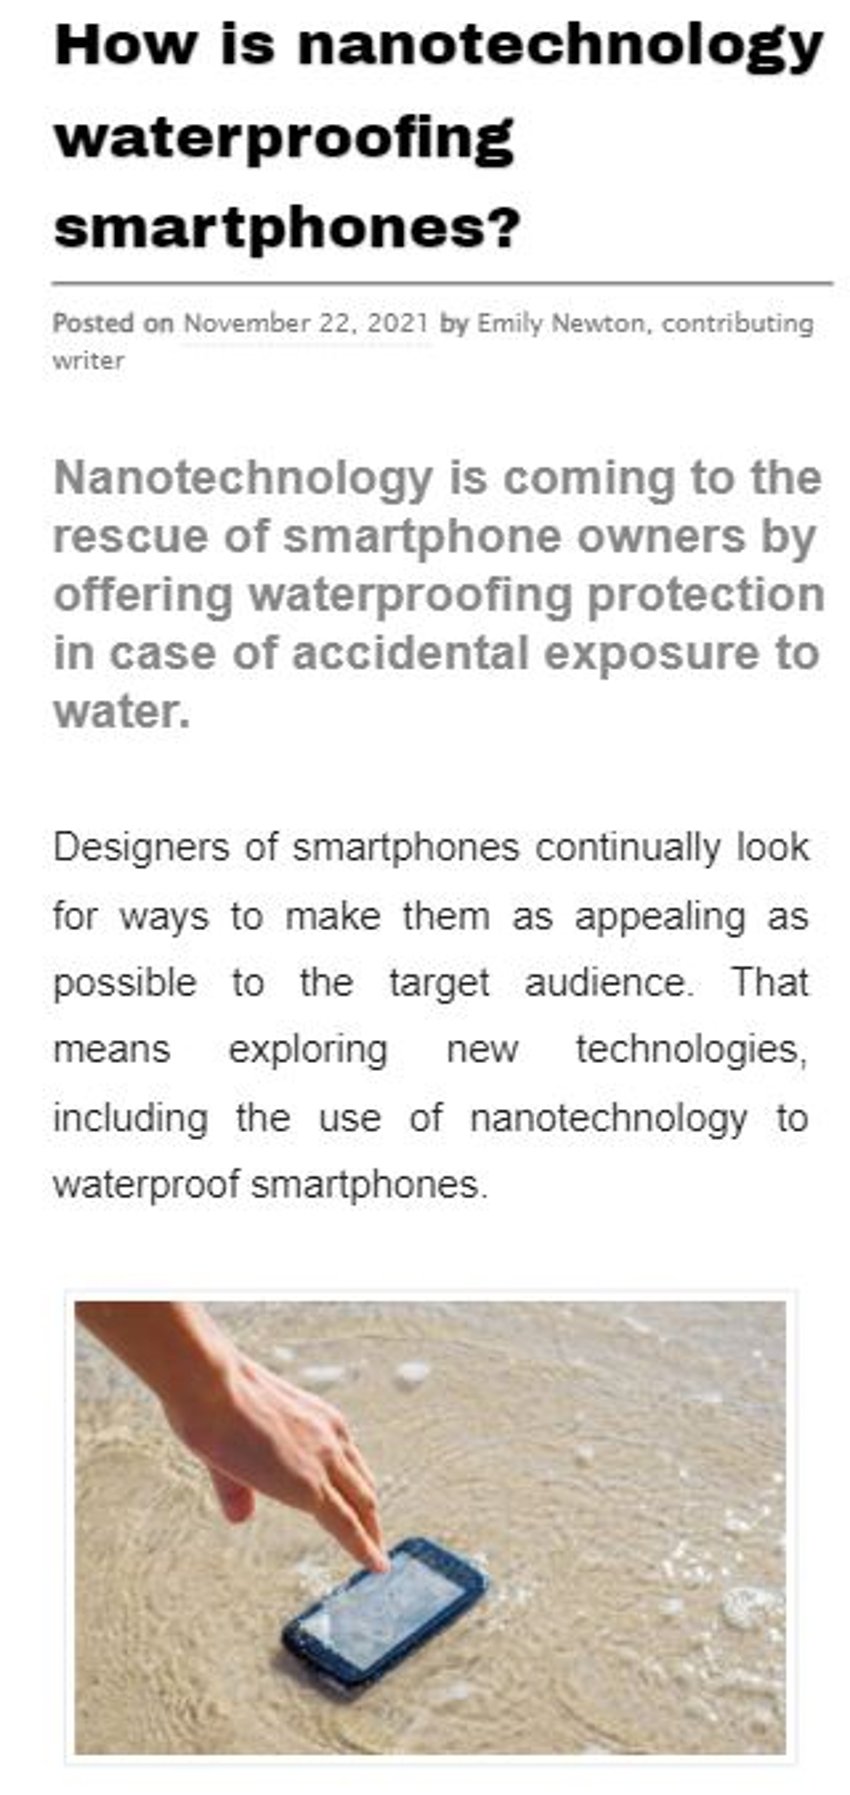 check out the full post [here](https://www.electronicproducts.com/how-is-nanotechnology-waterproofing-smartphones/#)